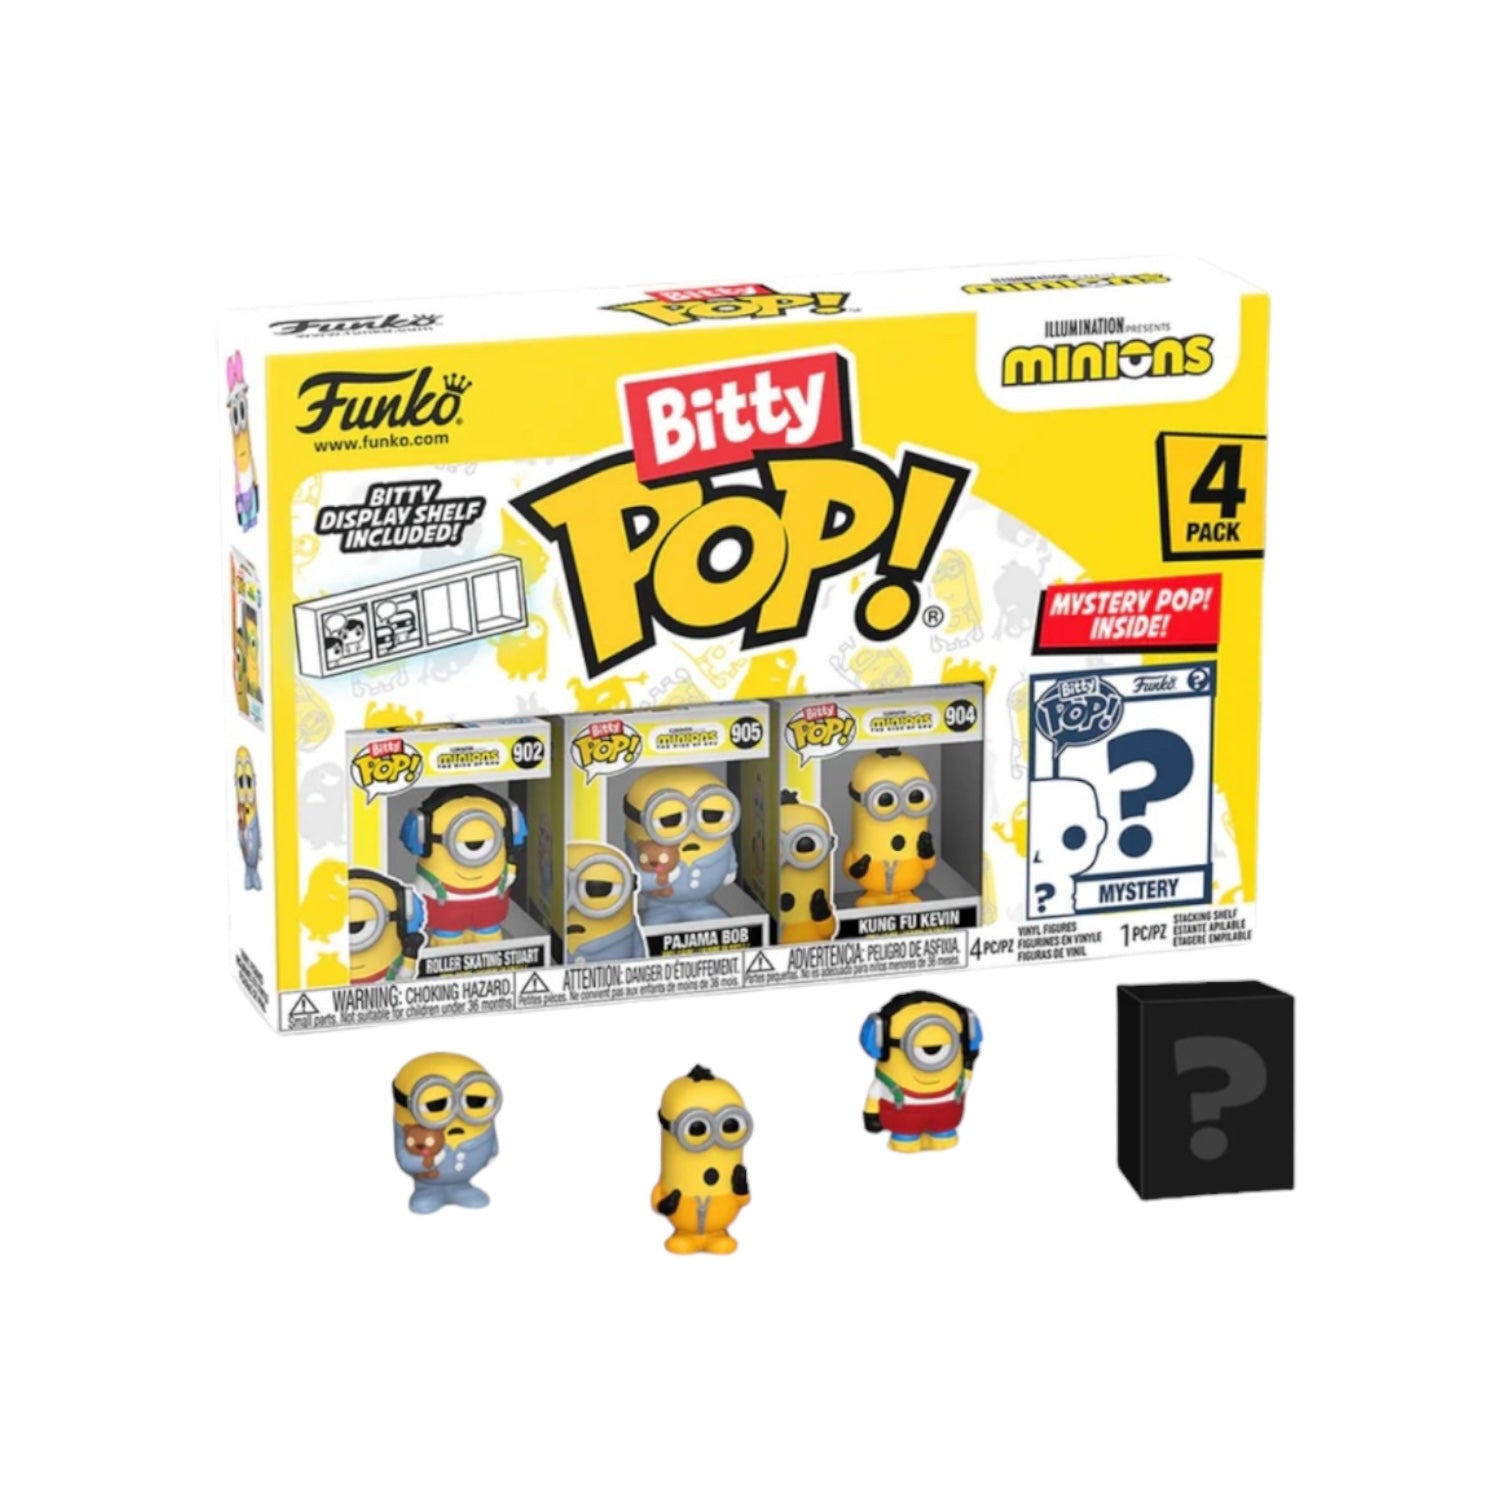 Roller Skating Stuart 4 Pack Bitty Funko Pop! - Minions - Chance Of Chase - PREORDER